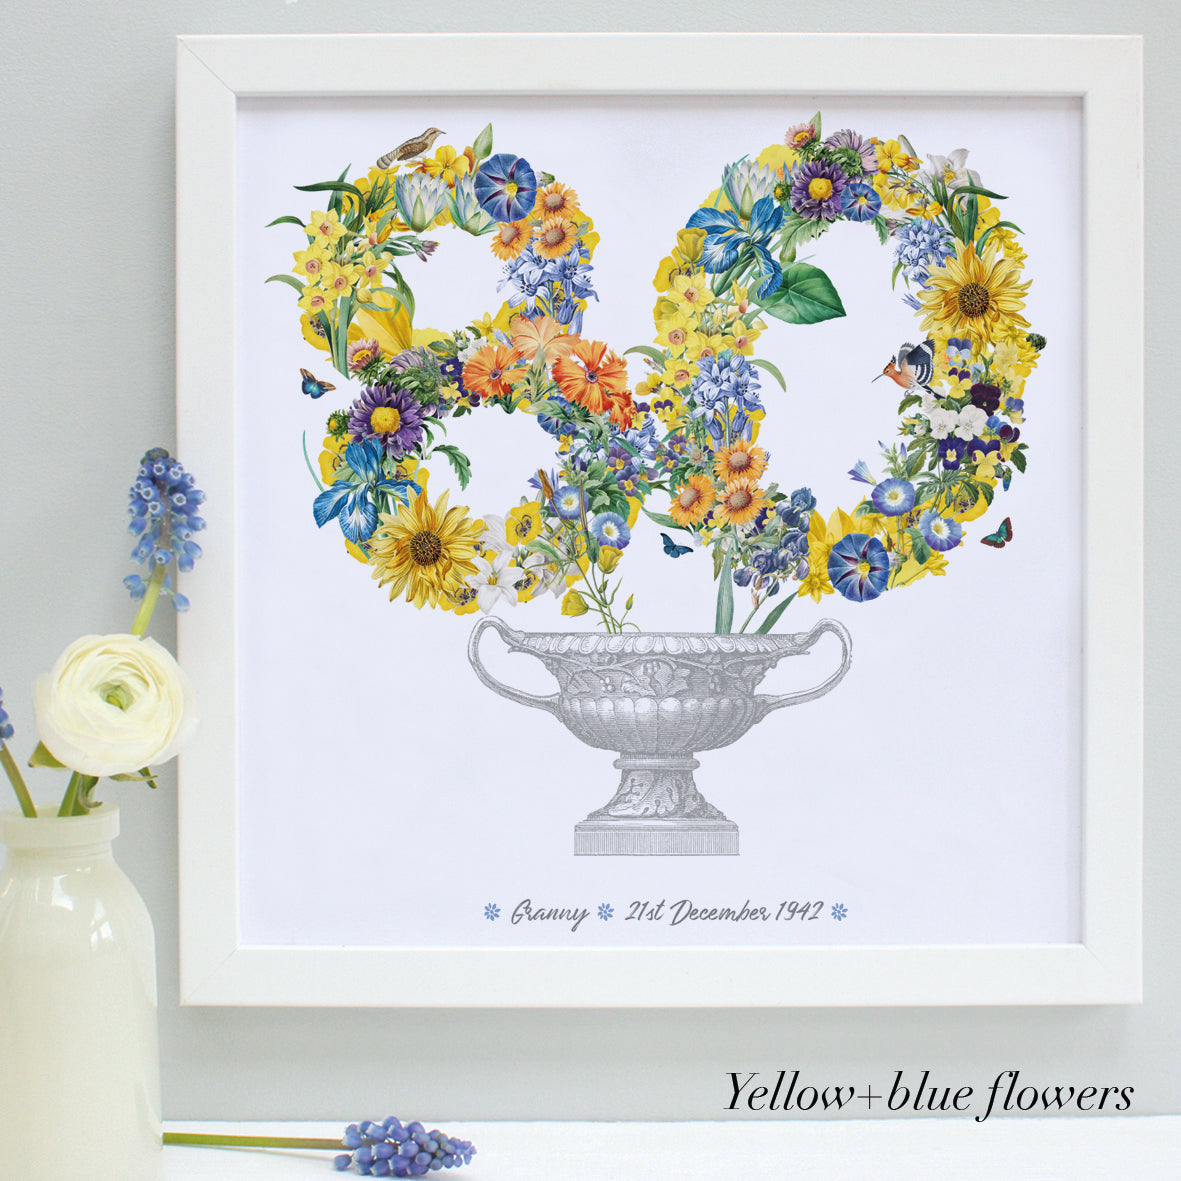 birthday 80th print gift with yellow and blue flowers in a white frame